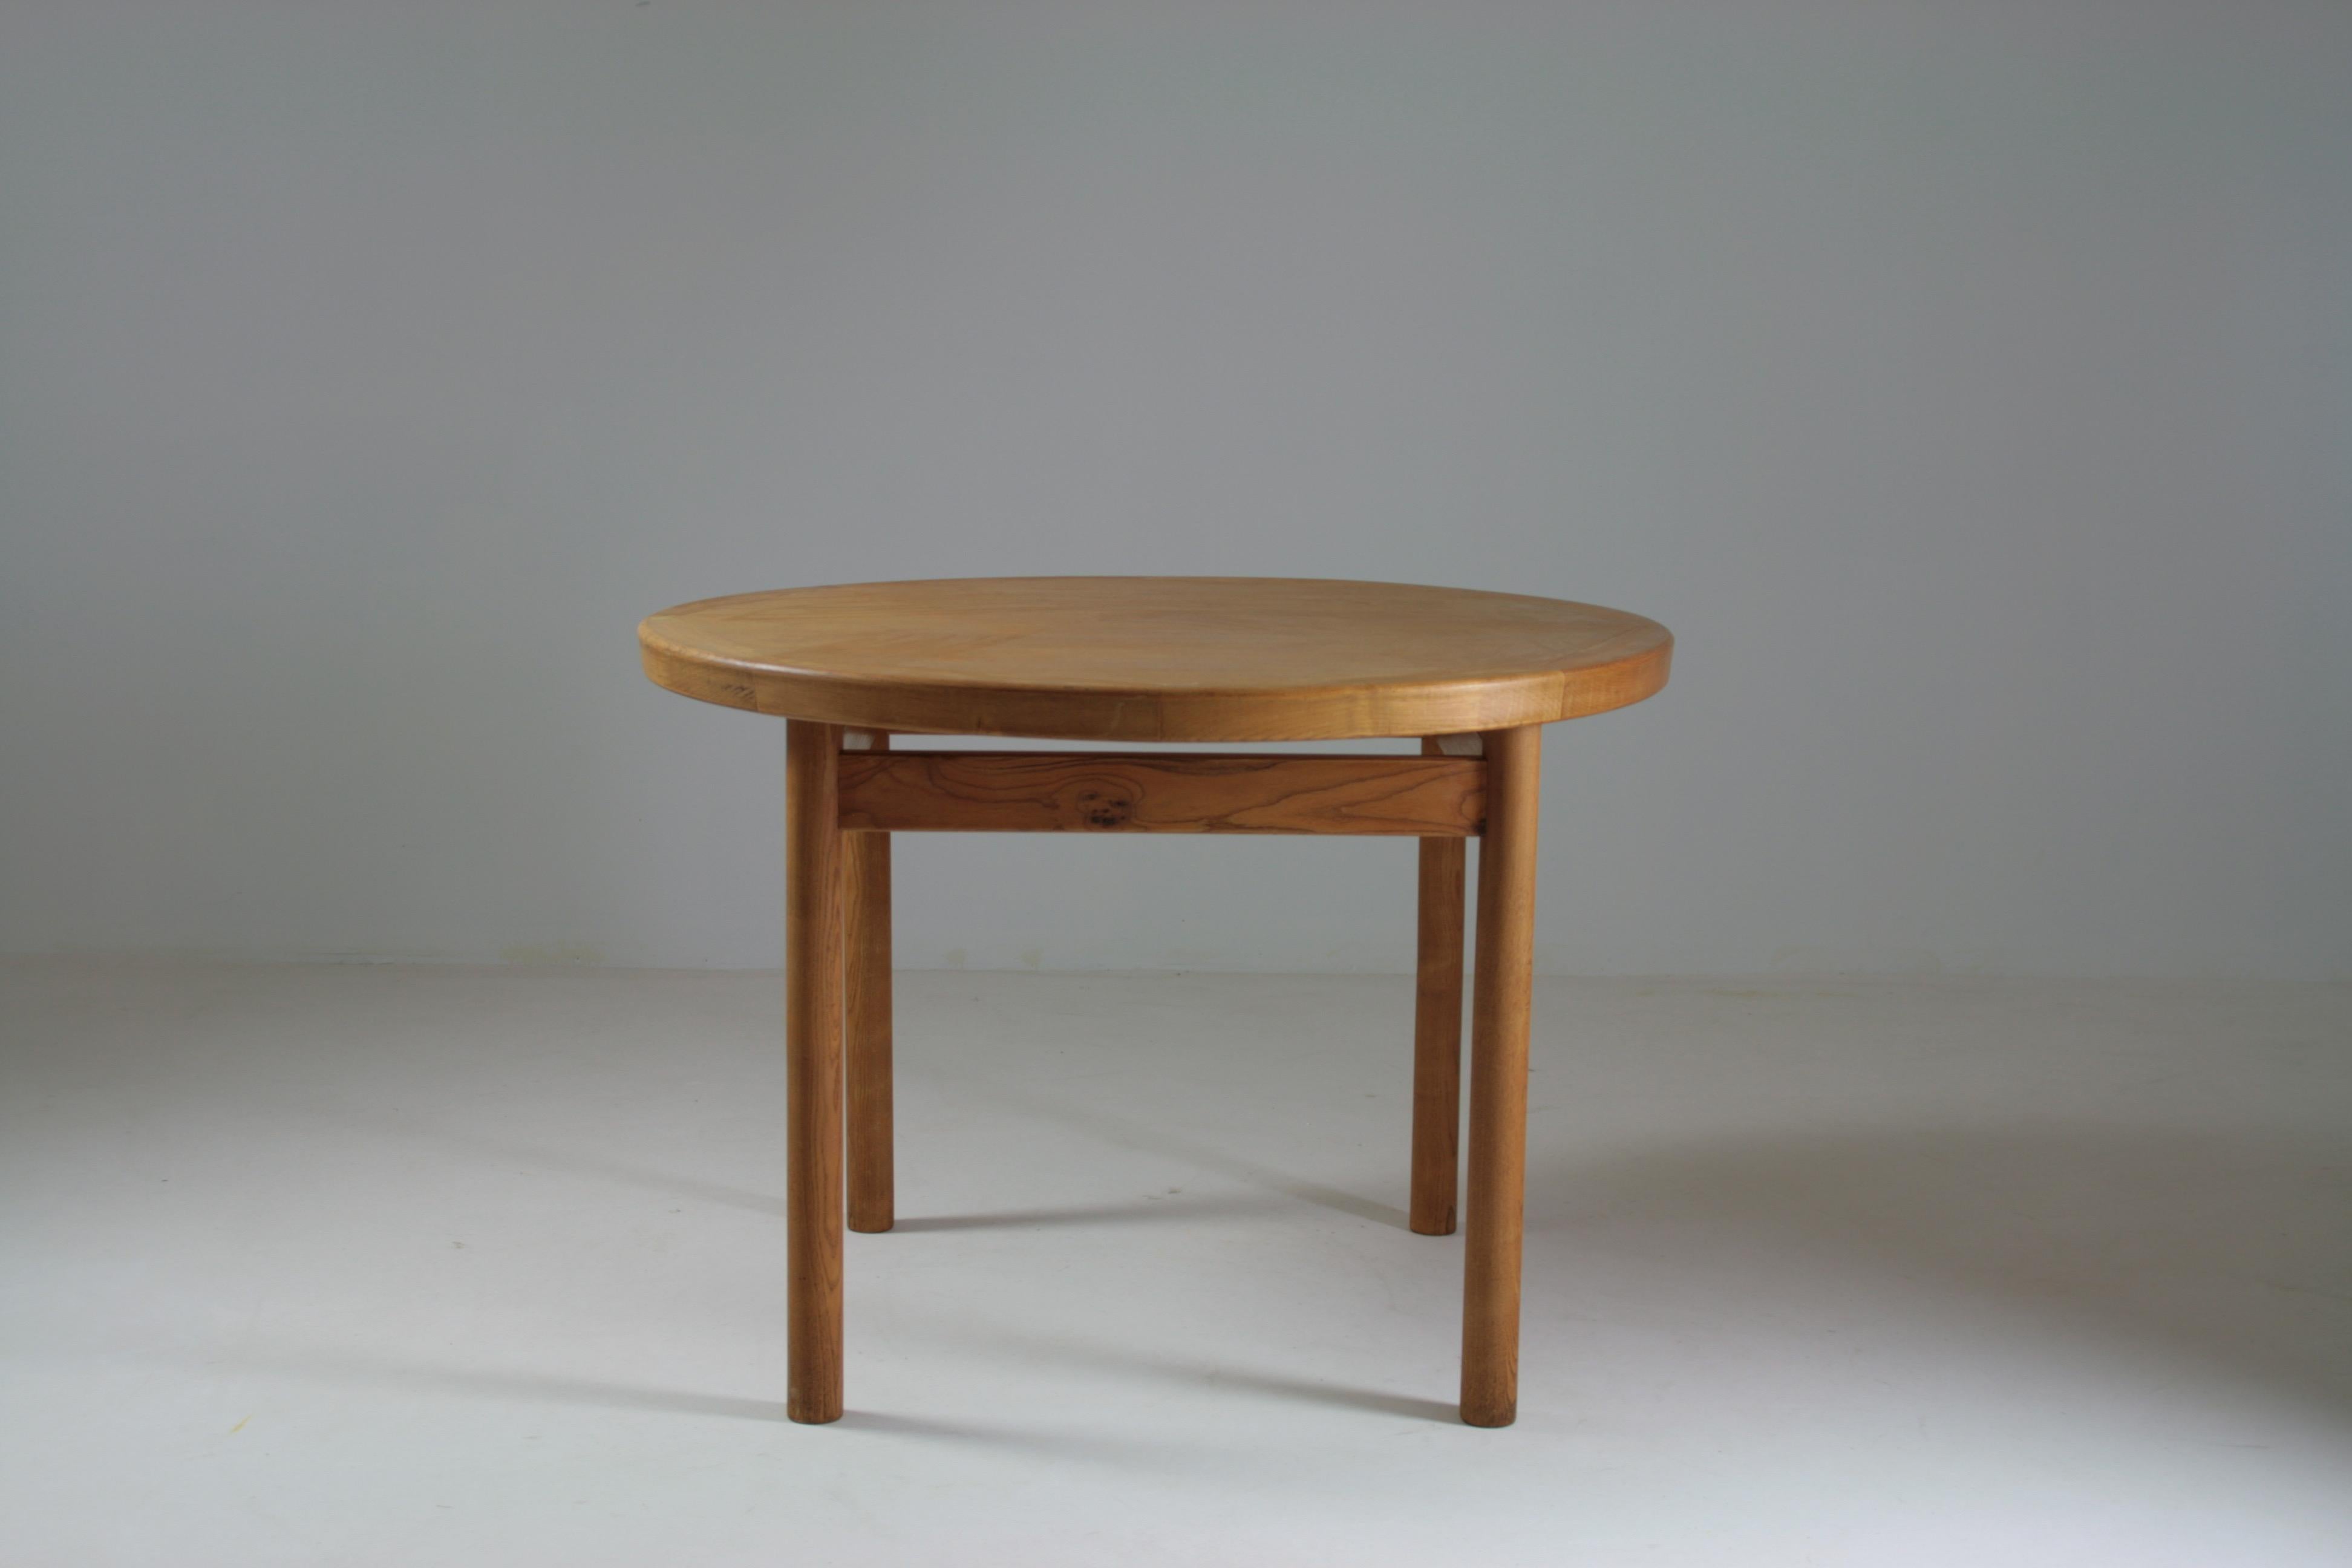 Round “Dordogne” model table by Robert Sentou and produced in the 1950s. Structured in solid ash and veneer. Table with a pretty patina that can accommodate between 4 and 6 people. Beautiful used condition with no particular defects to report.